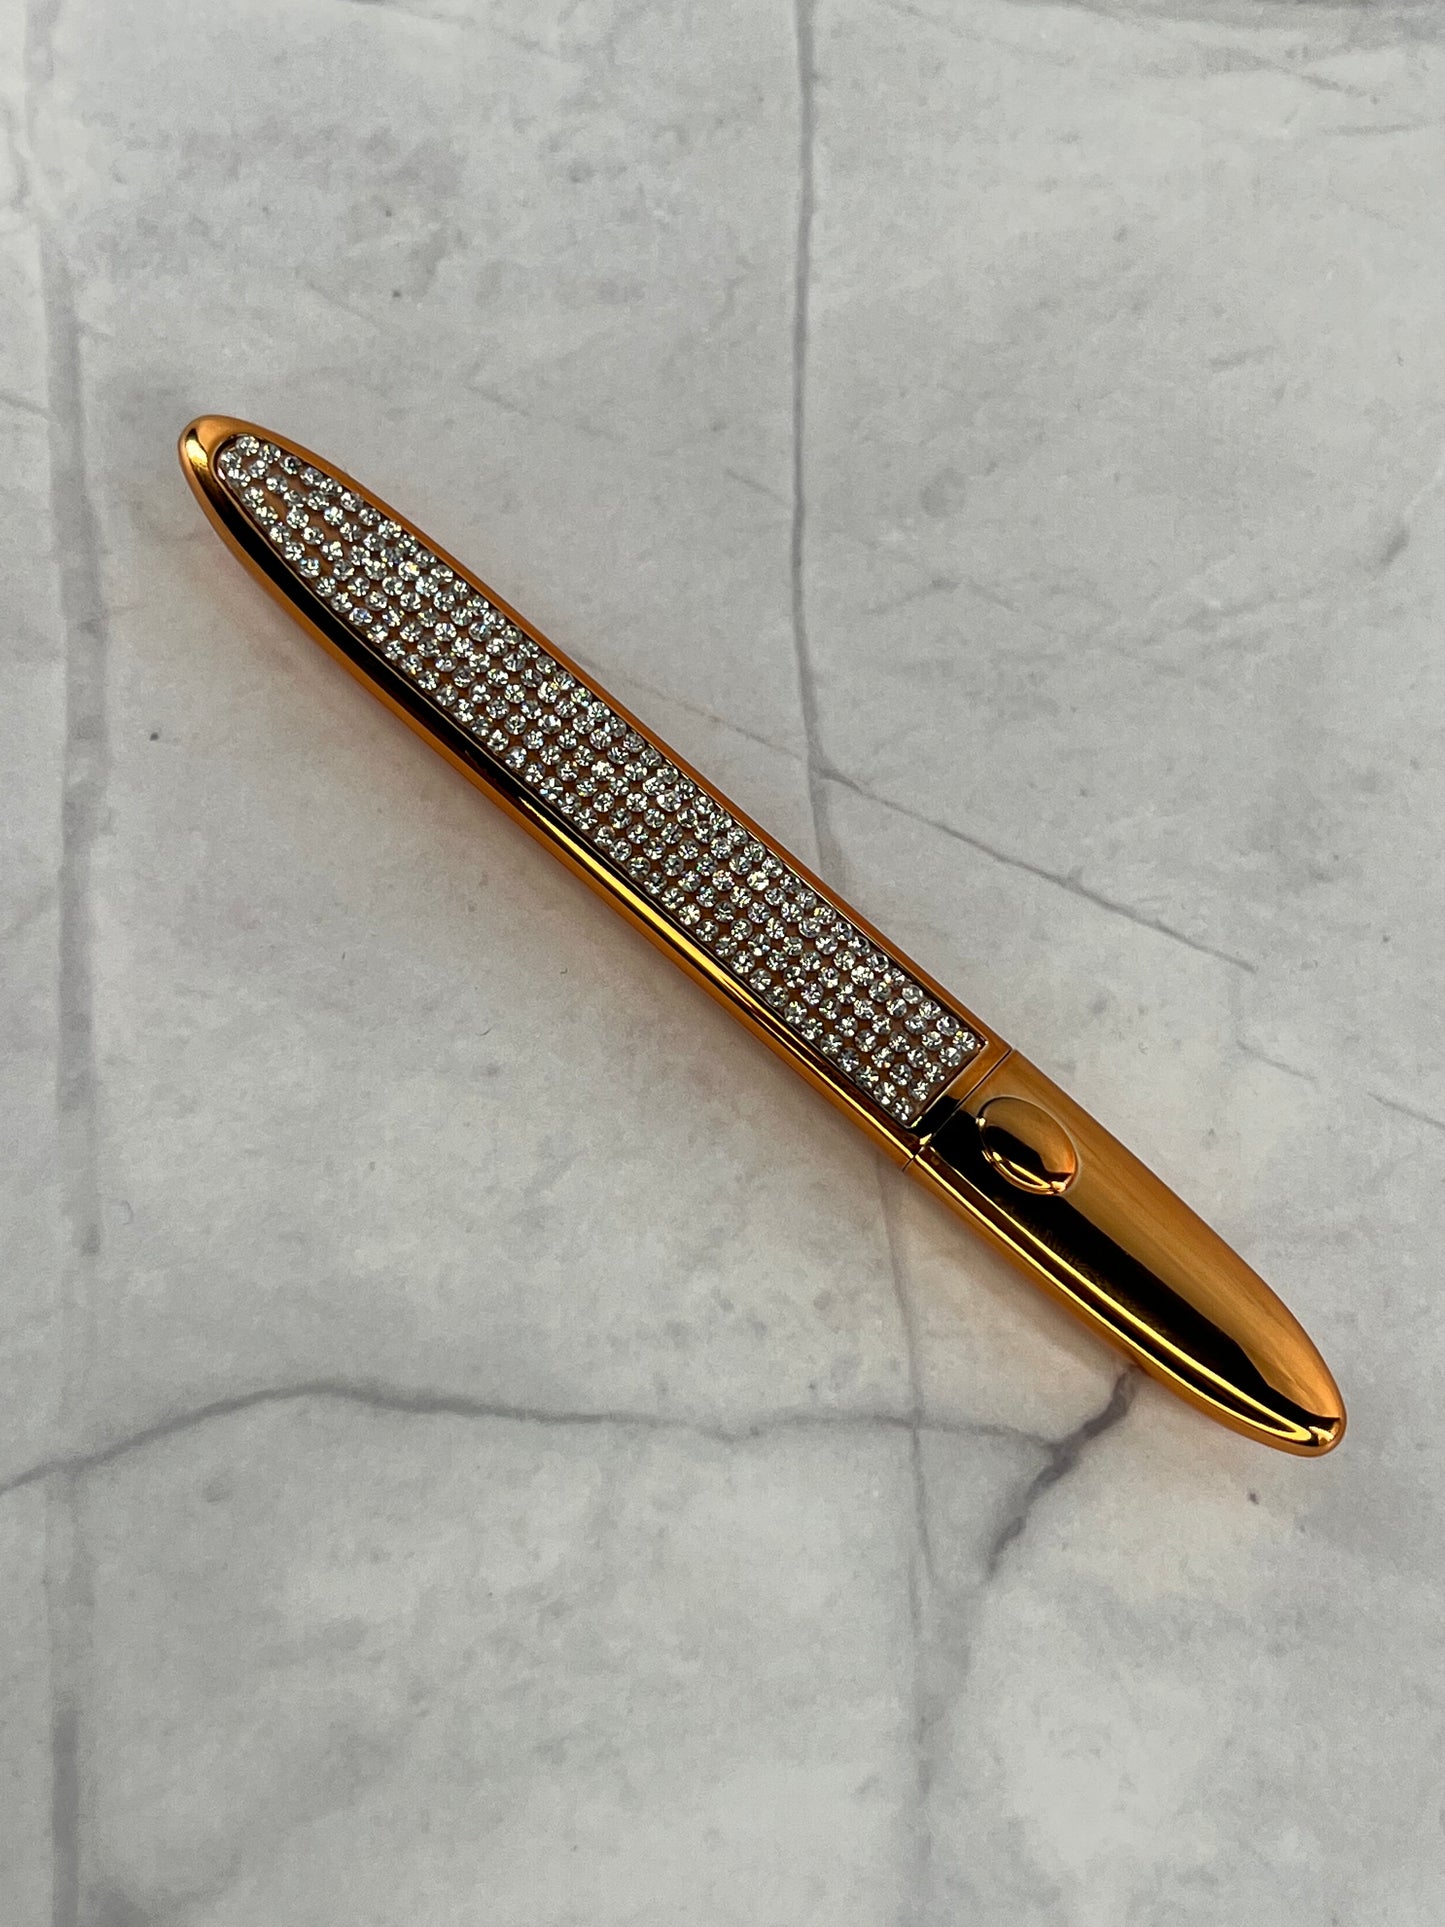 Bold and Luscious Diamond Status Magic Lash Adhesive Liner is a flat and wide style pen casing with a fine tip for precision use. a full shot reveals the beautiful casing with white daux diamonds in a straight line on the outside and a gold trim.